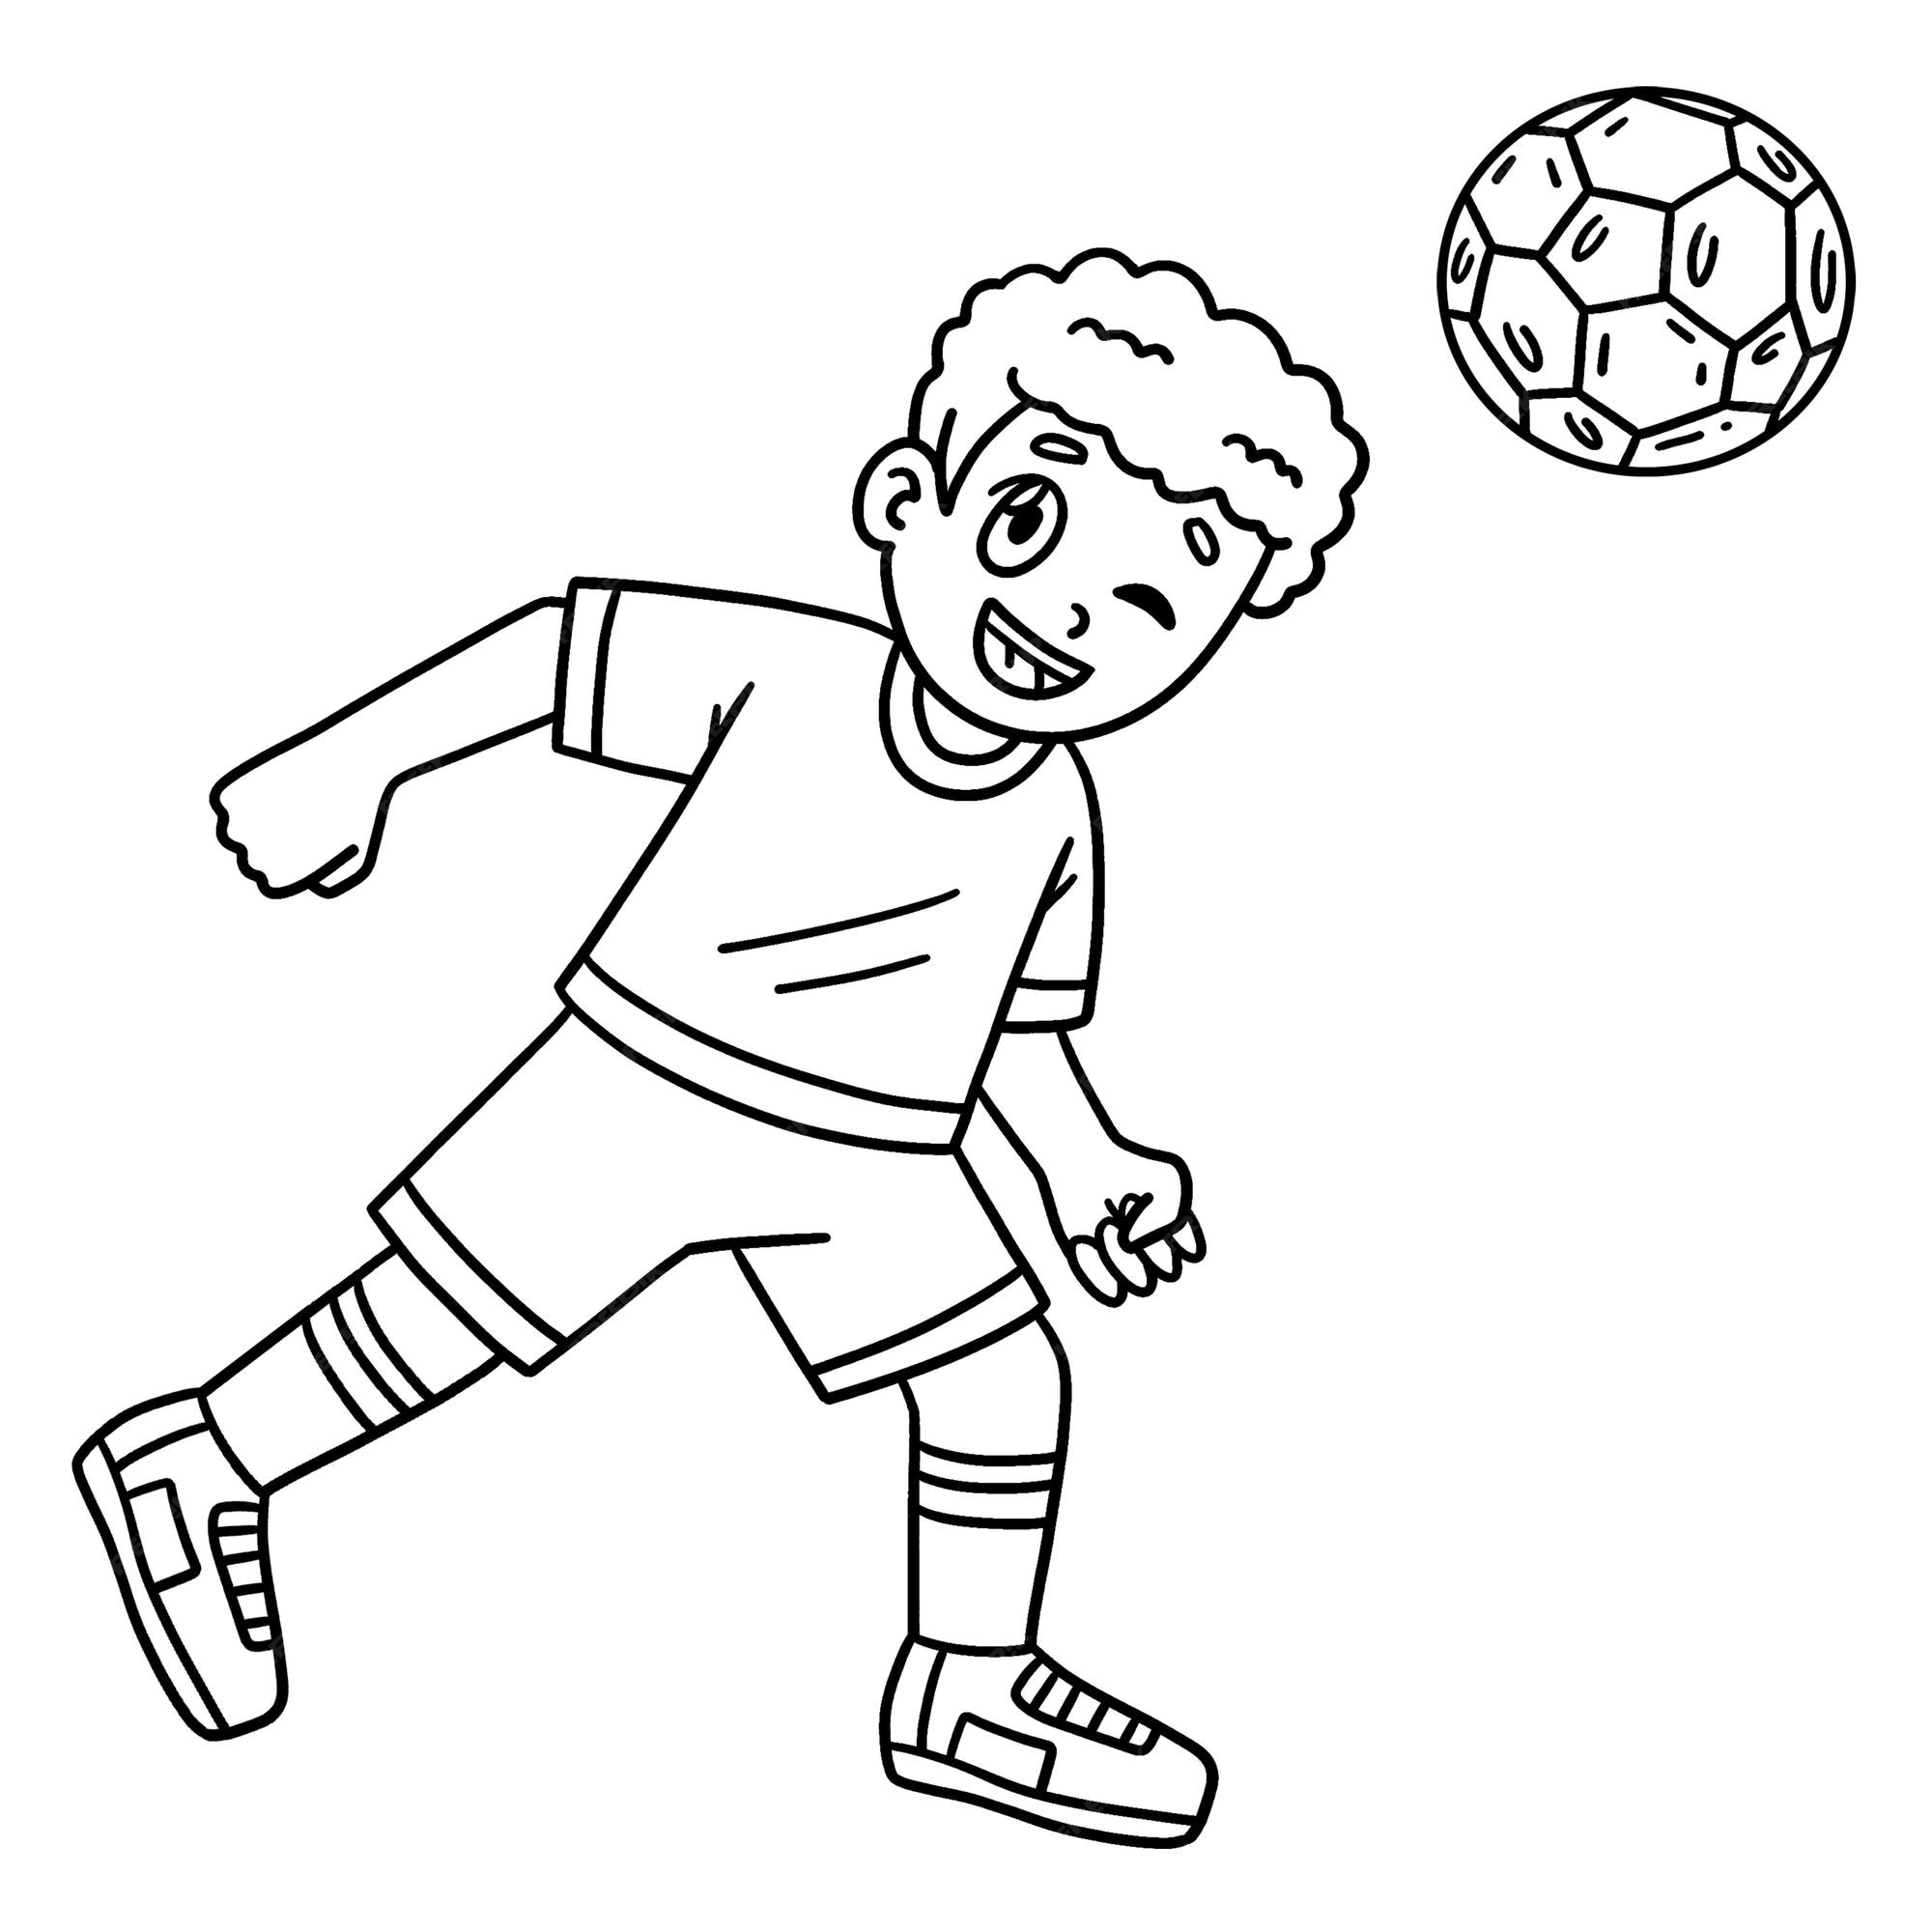 Premium vector it is a cute and funny coloring page of a boy hitting a soccer ball with a head provides hours of coloring fun for children to color this page